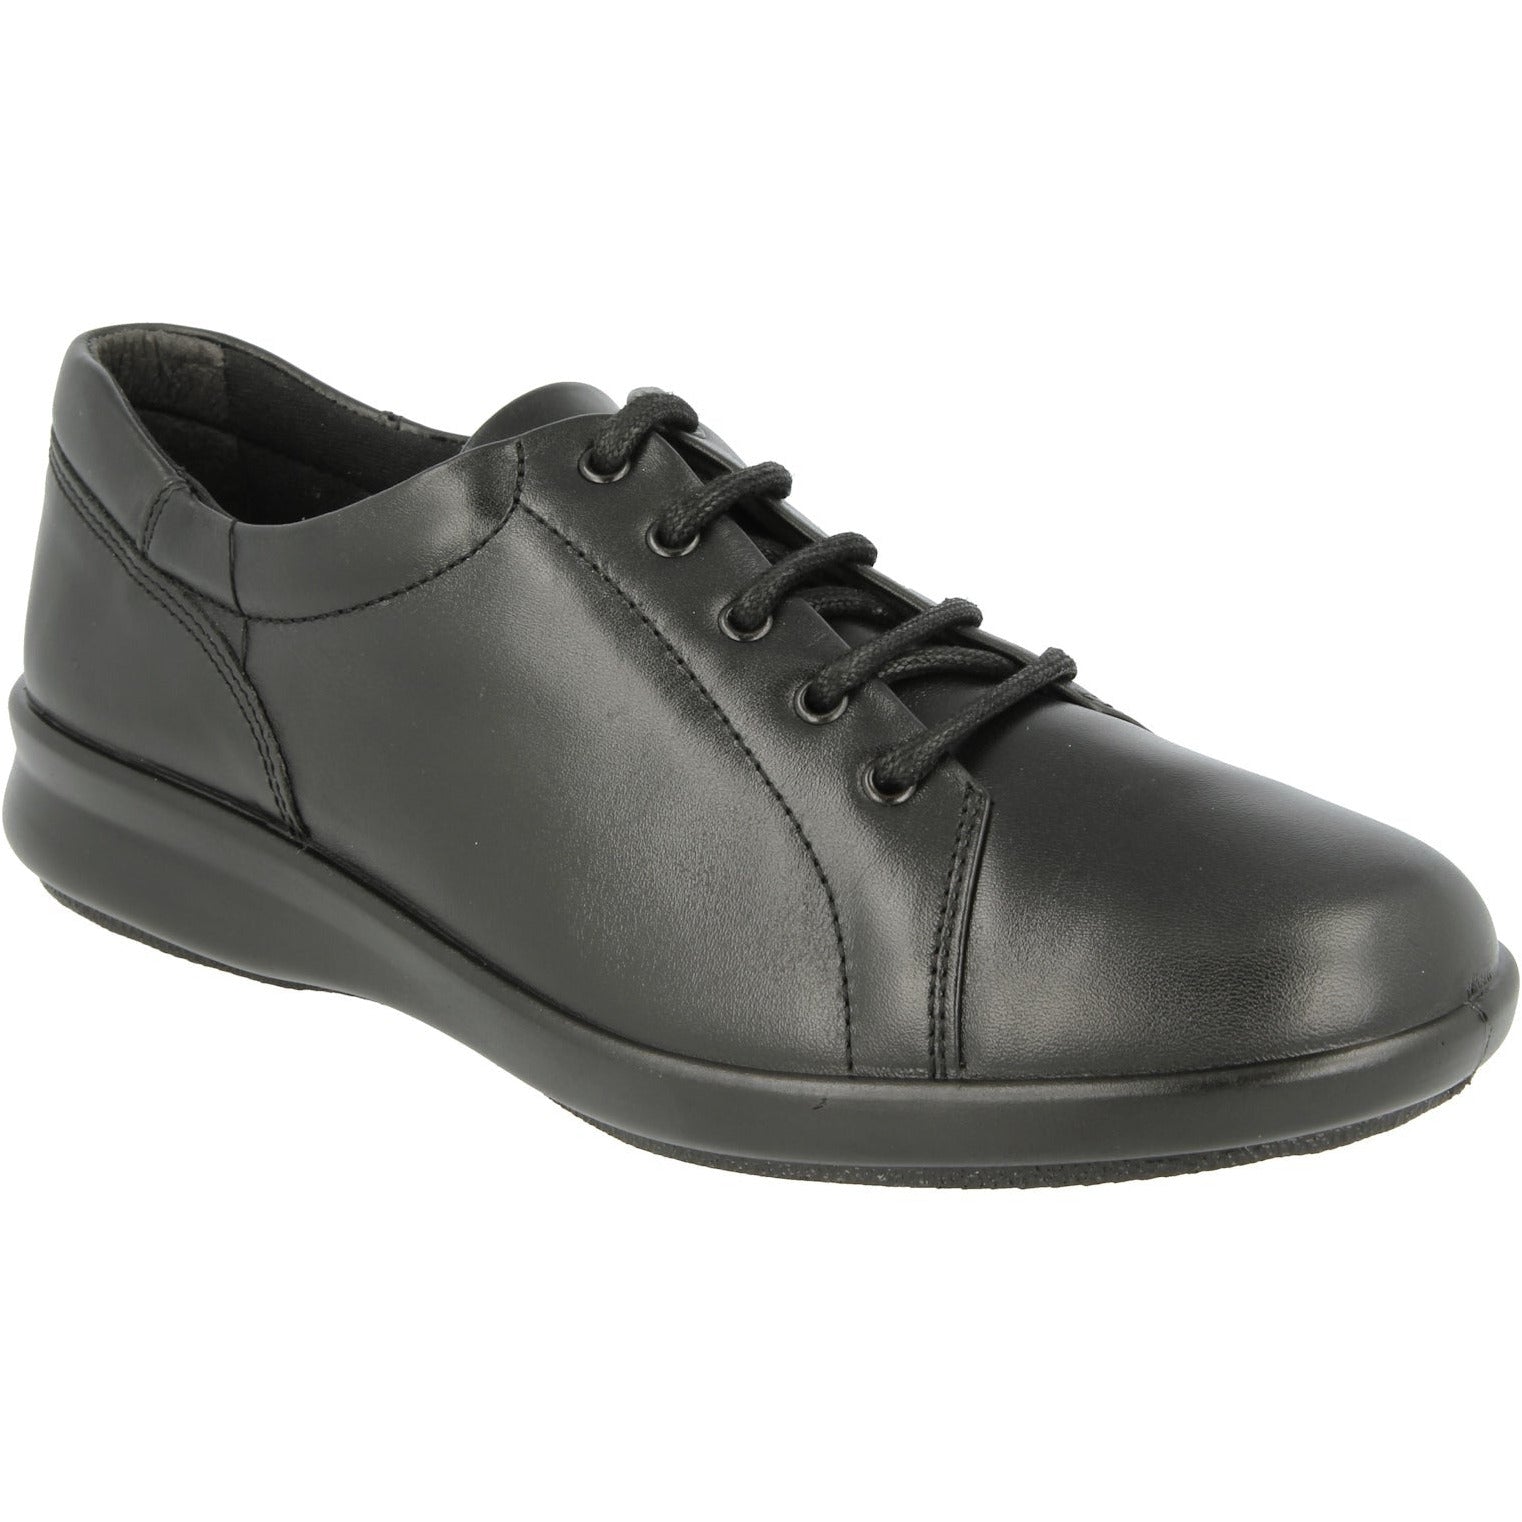 Easy B Phoebe(78007A) - Ladies Wide Fit Lace Shoe in black . Easy B Shoes | Wide Fit Shoes | Personal Shoe Fitting Service | Wisemans | Bantry | West Cork | Munster | Ireland